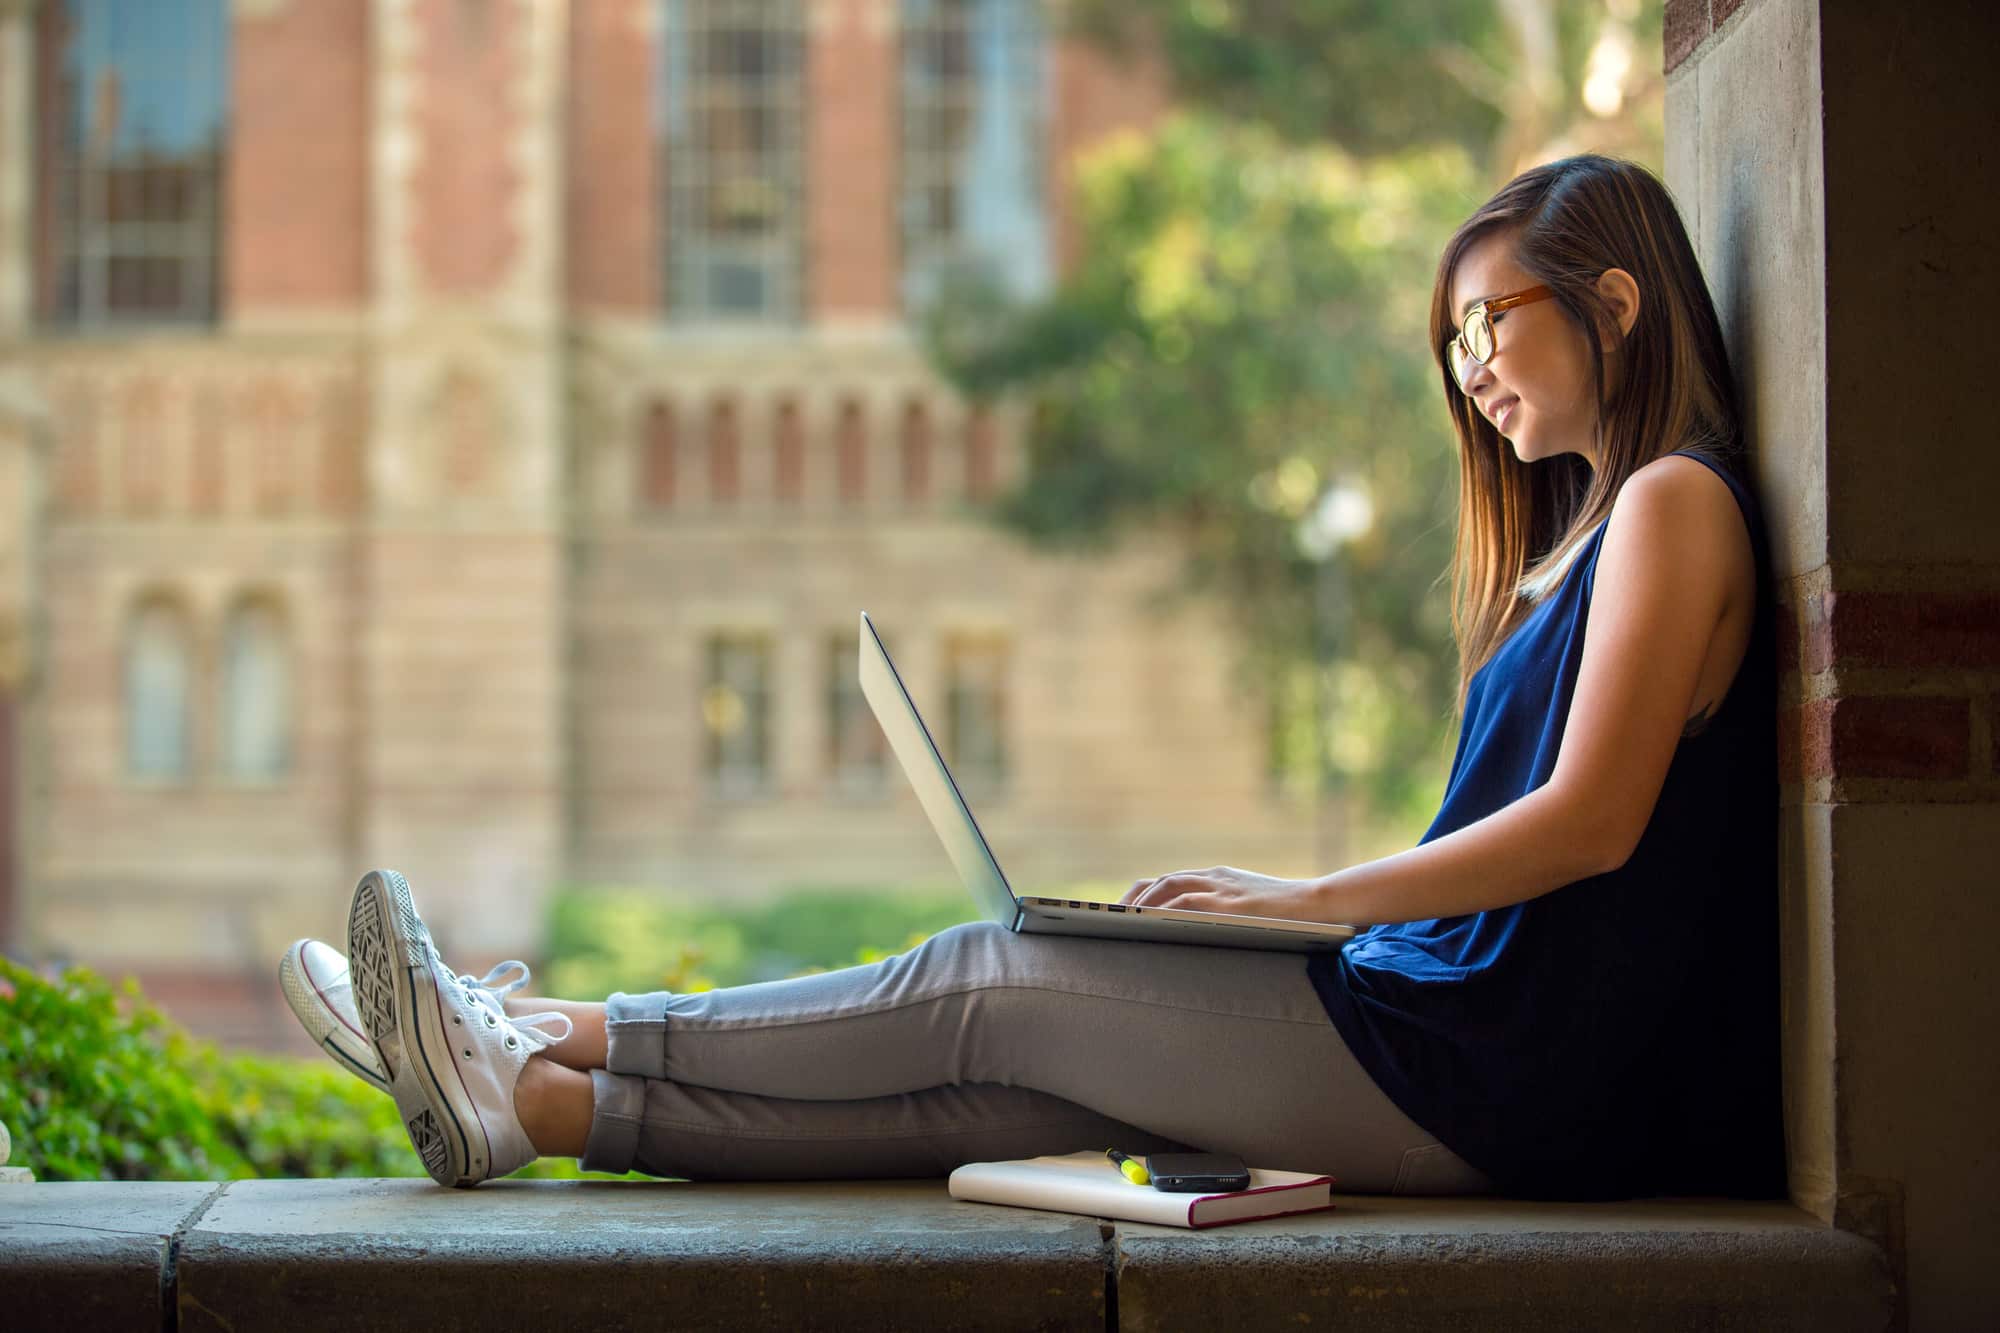 College student studying on campus outdoor with laptop casual lifestyle